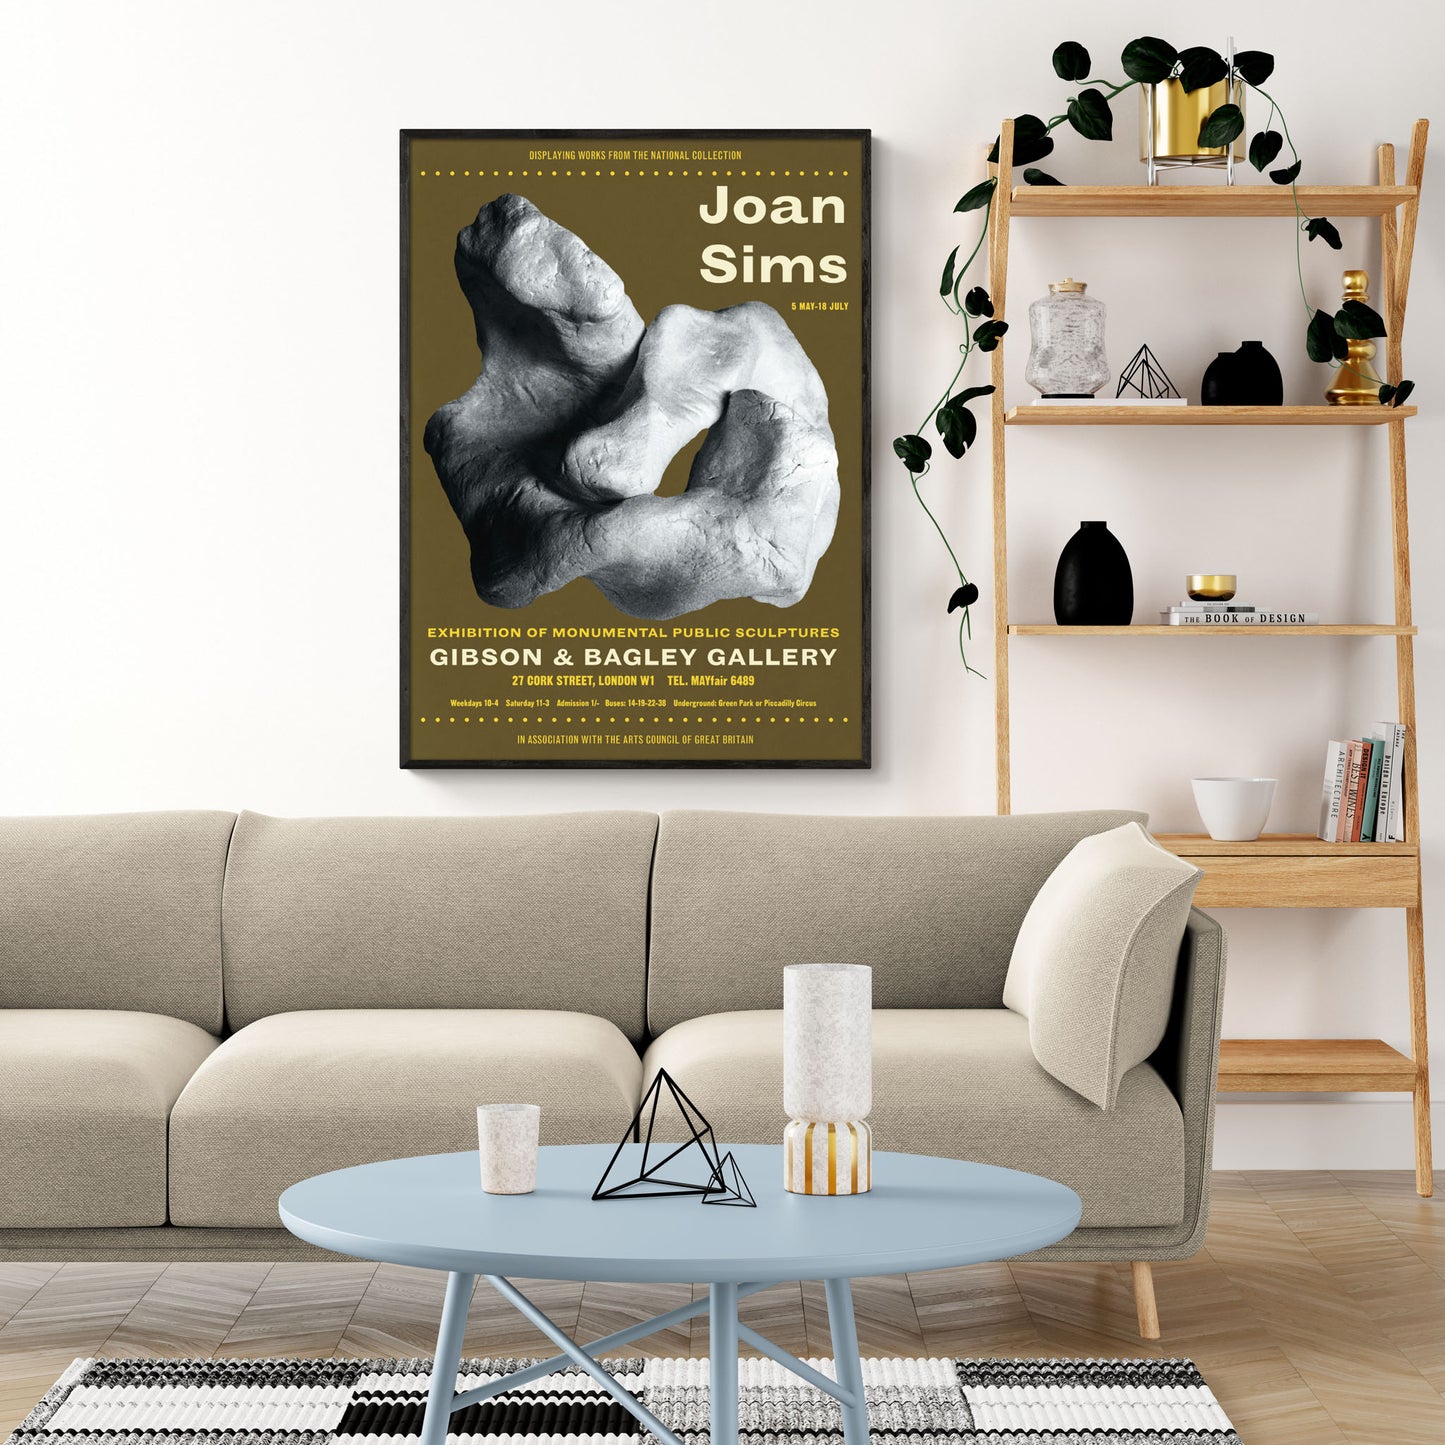 Joan Sims ('Carry On' Film Actor) Art Exhibition Poster